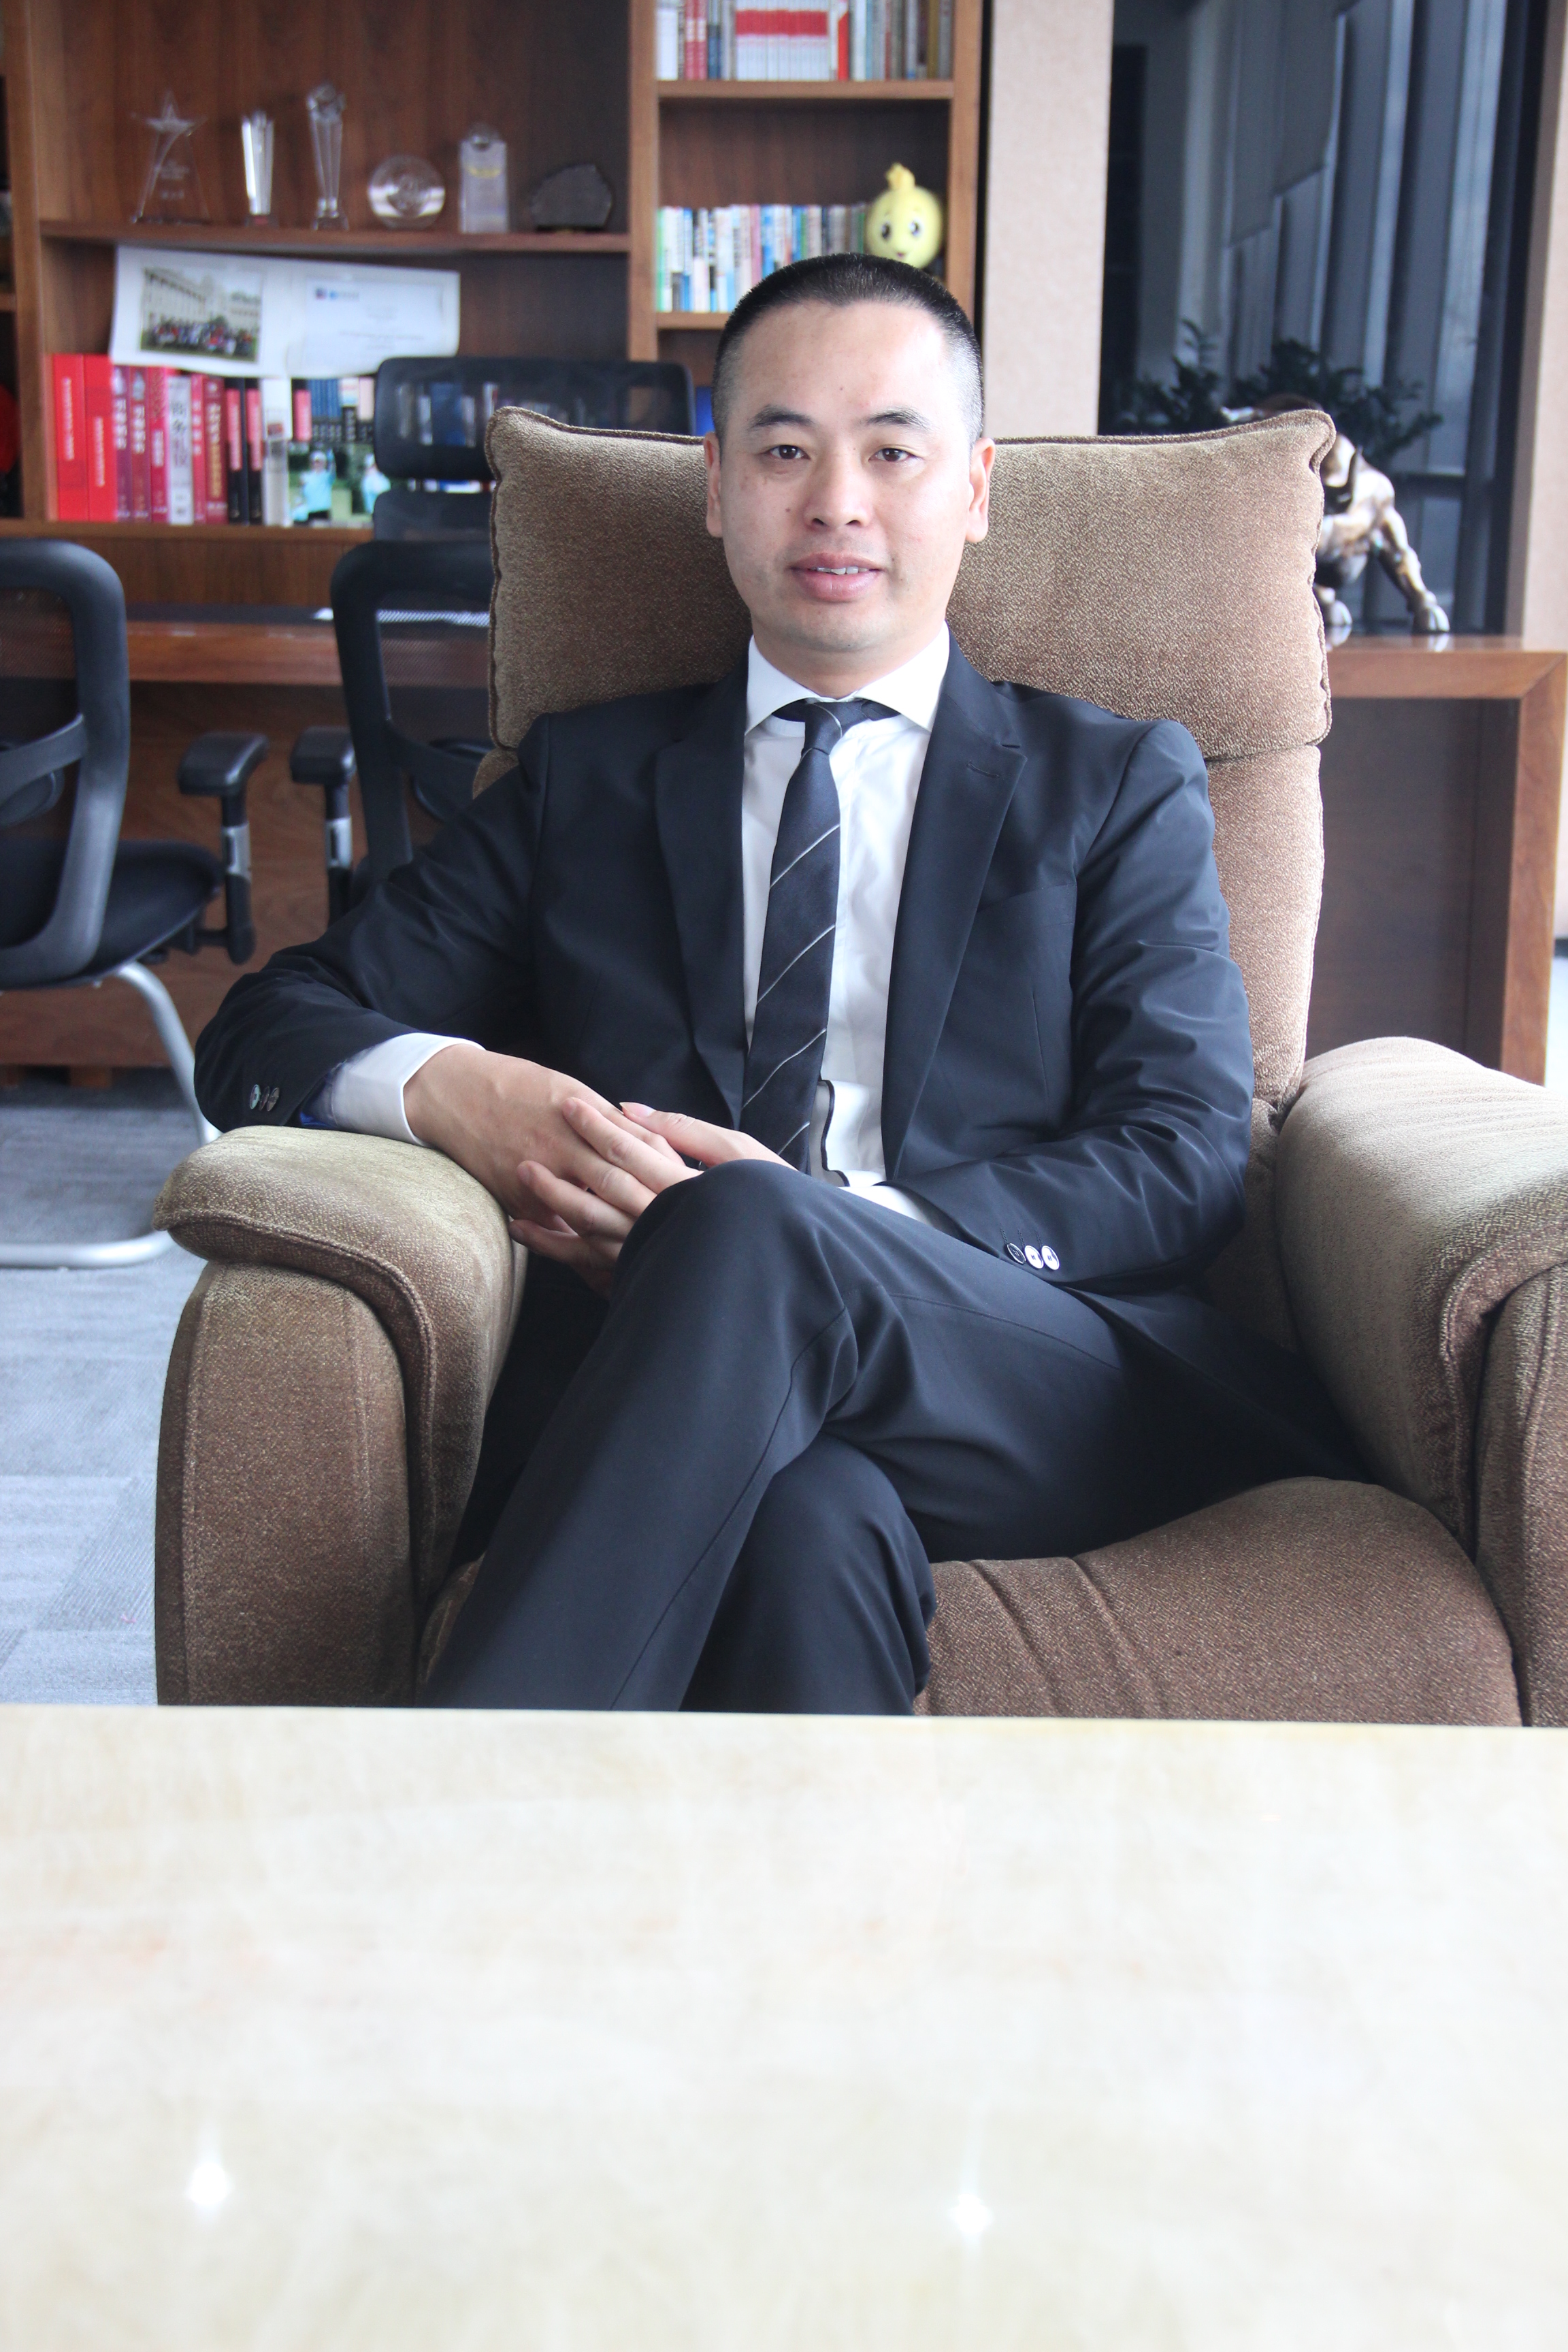 Qfang founder Liang Wenhua in an interview as the company he founded in Shenzhen in 2000 heads aggressively into the internet era. Photo: Handout